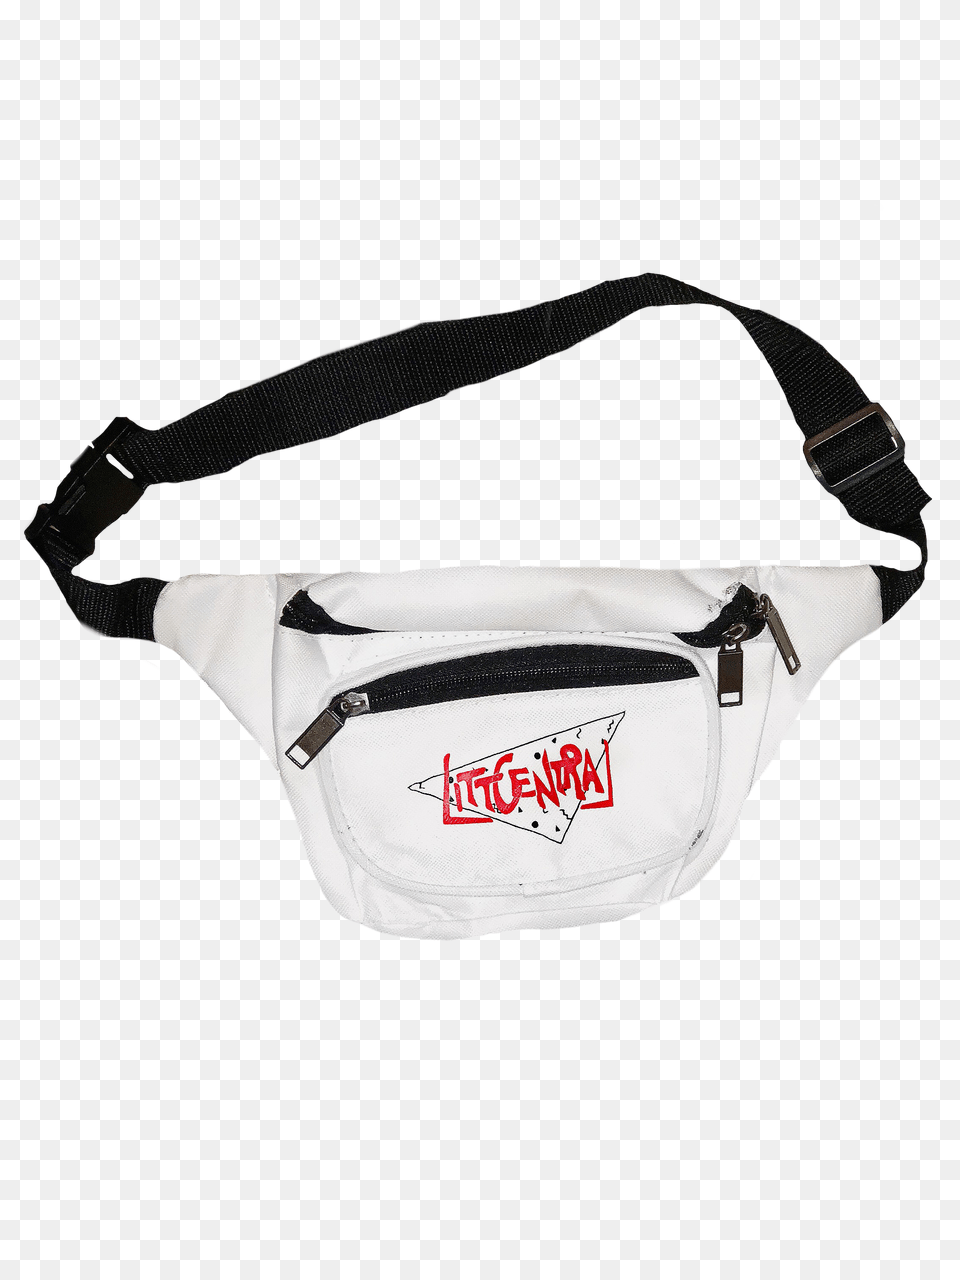 Phat Fanny Pack Littcentral, Accessories, Bag, Handbag, Goggles Png